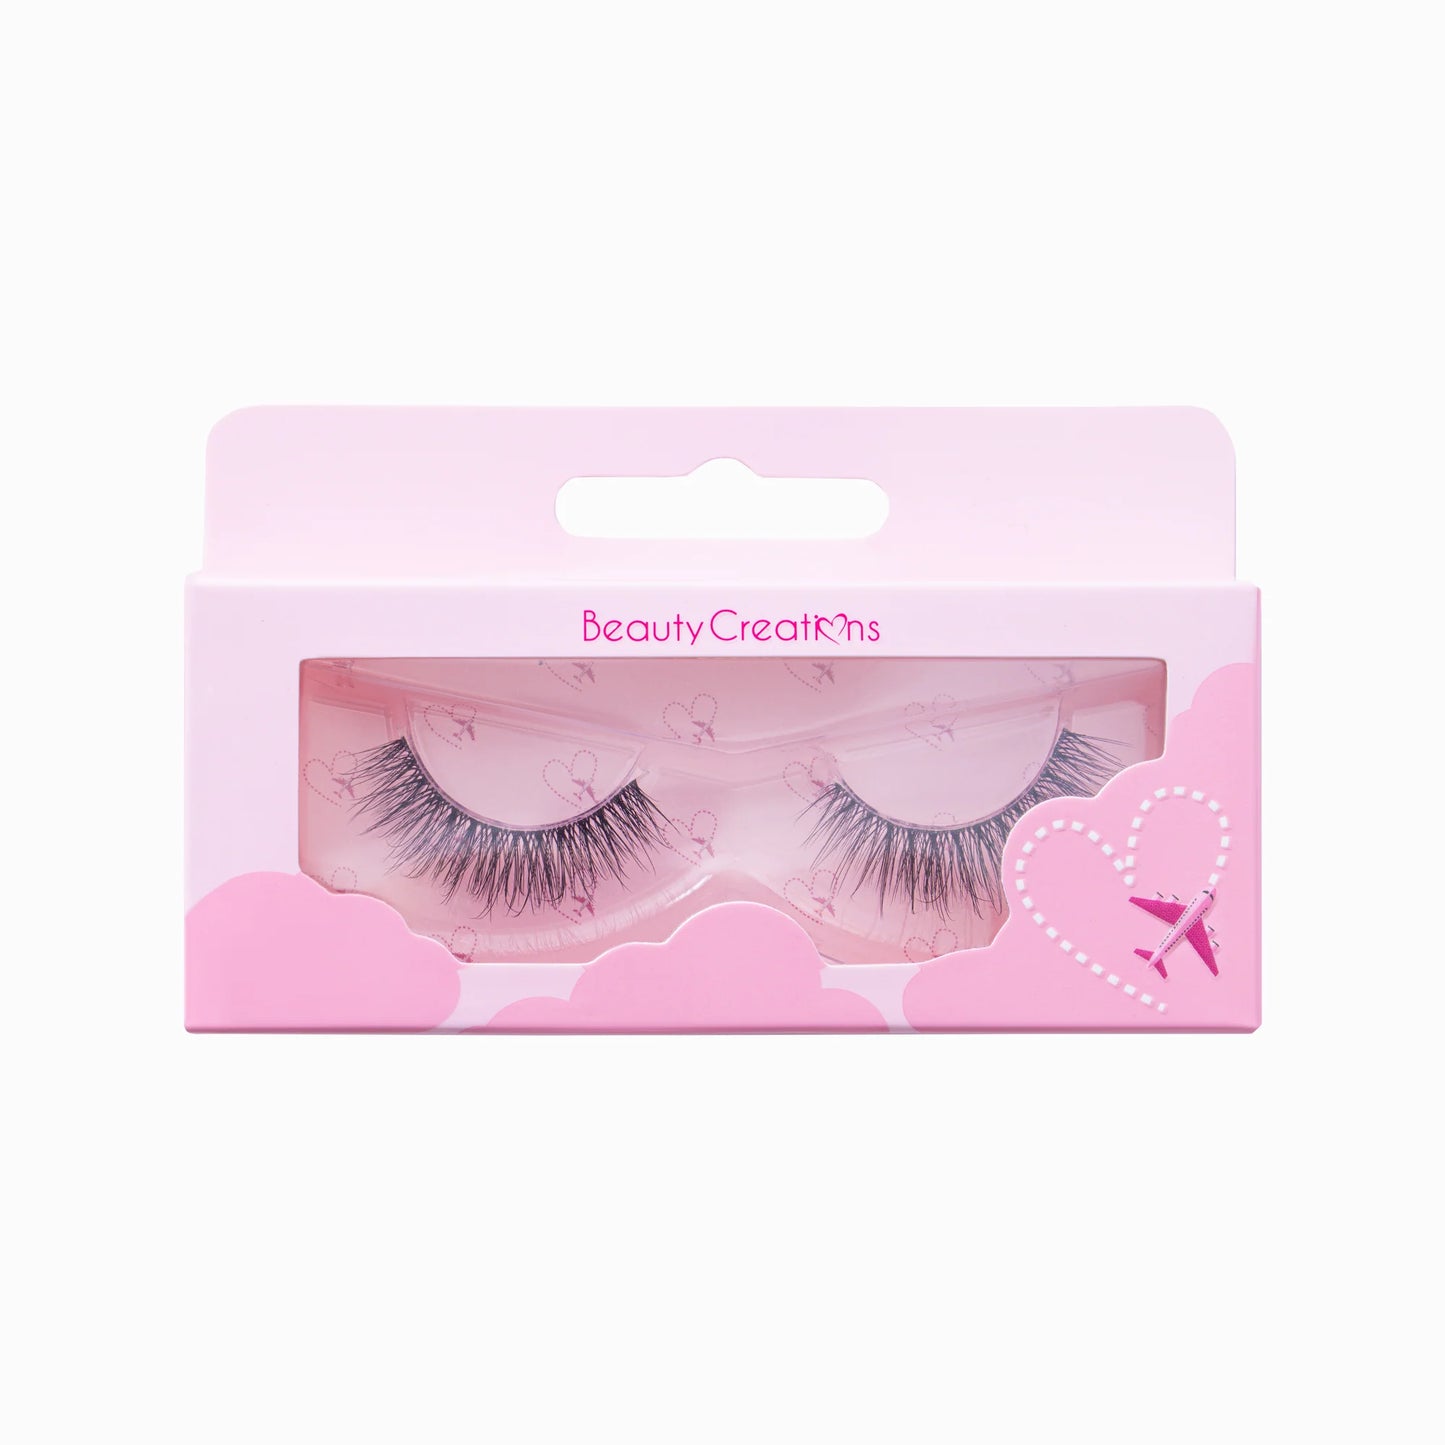 Beauty Creations - Take Me Somewhere Silk Lashes